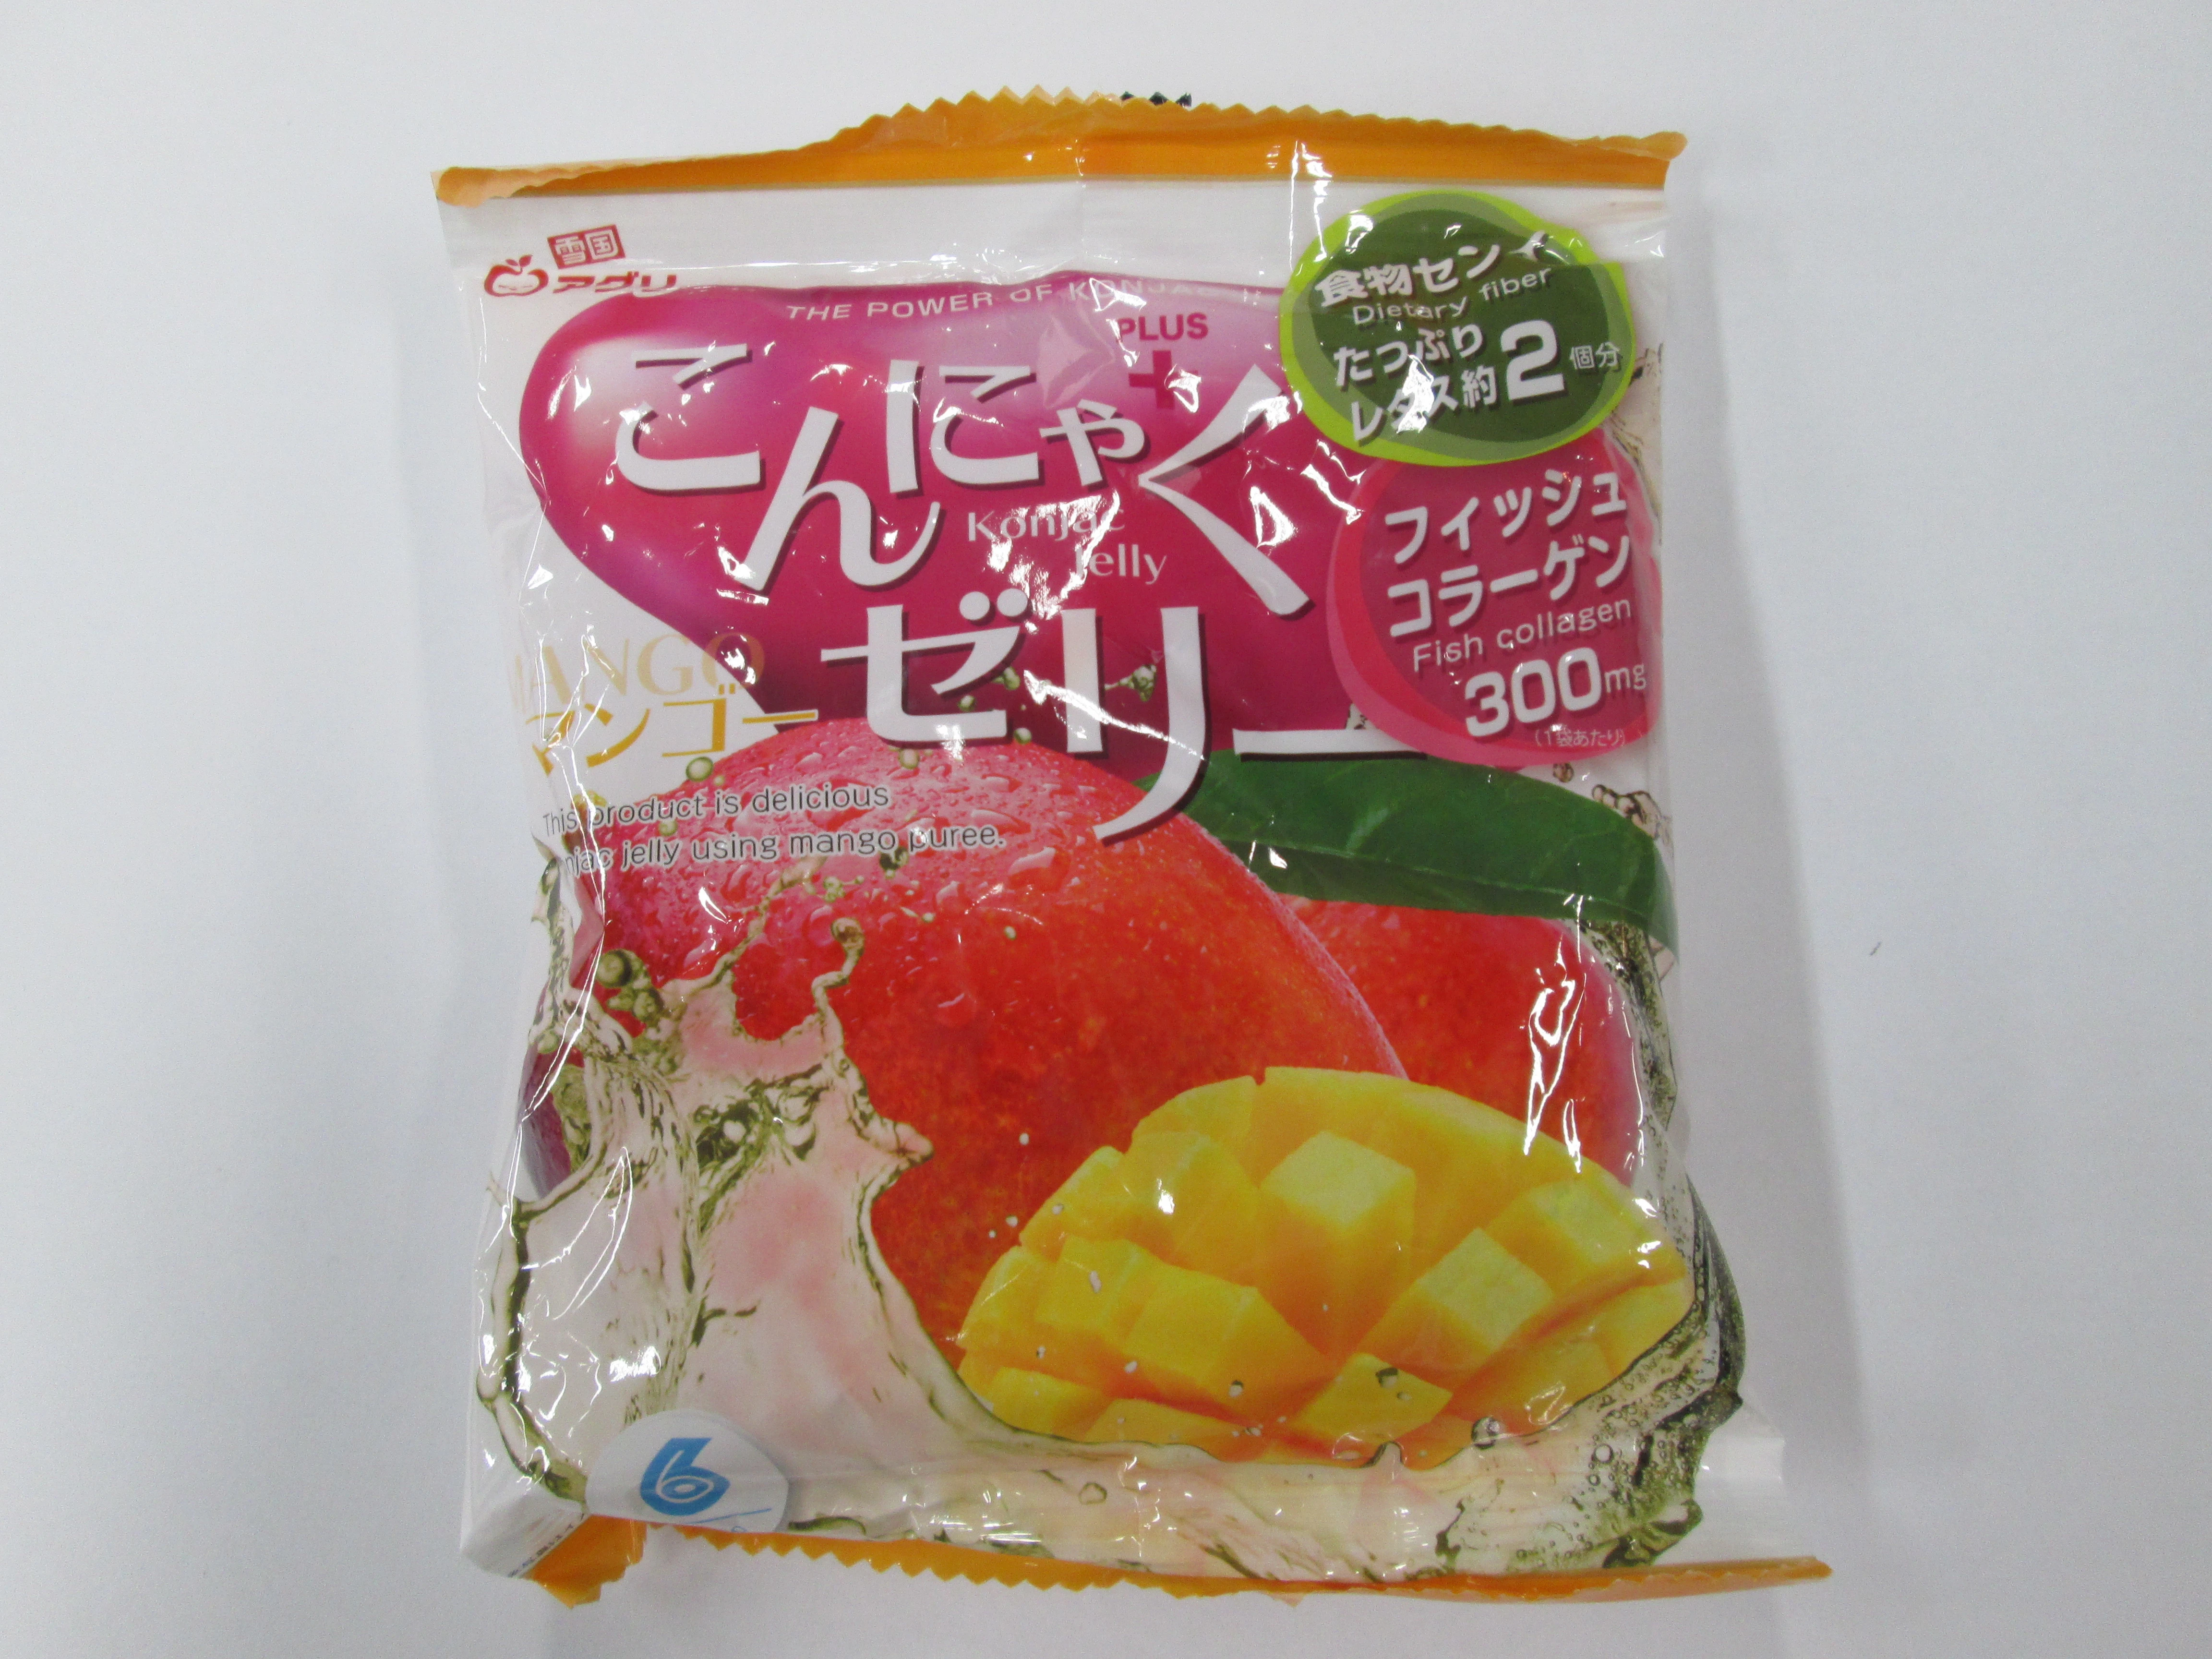 Low-carb tasty dietary fiber drinkable konjac fruit jelly pudding cup